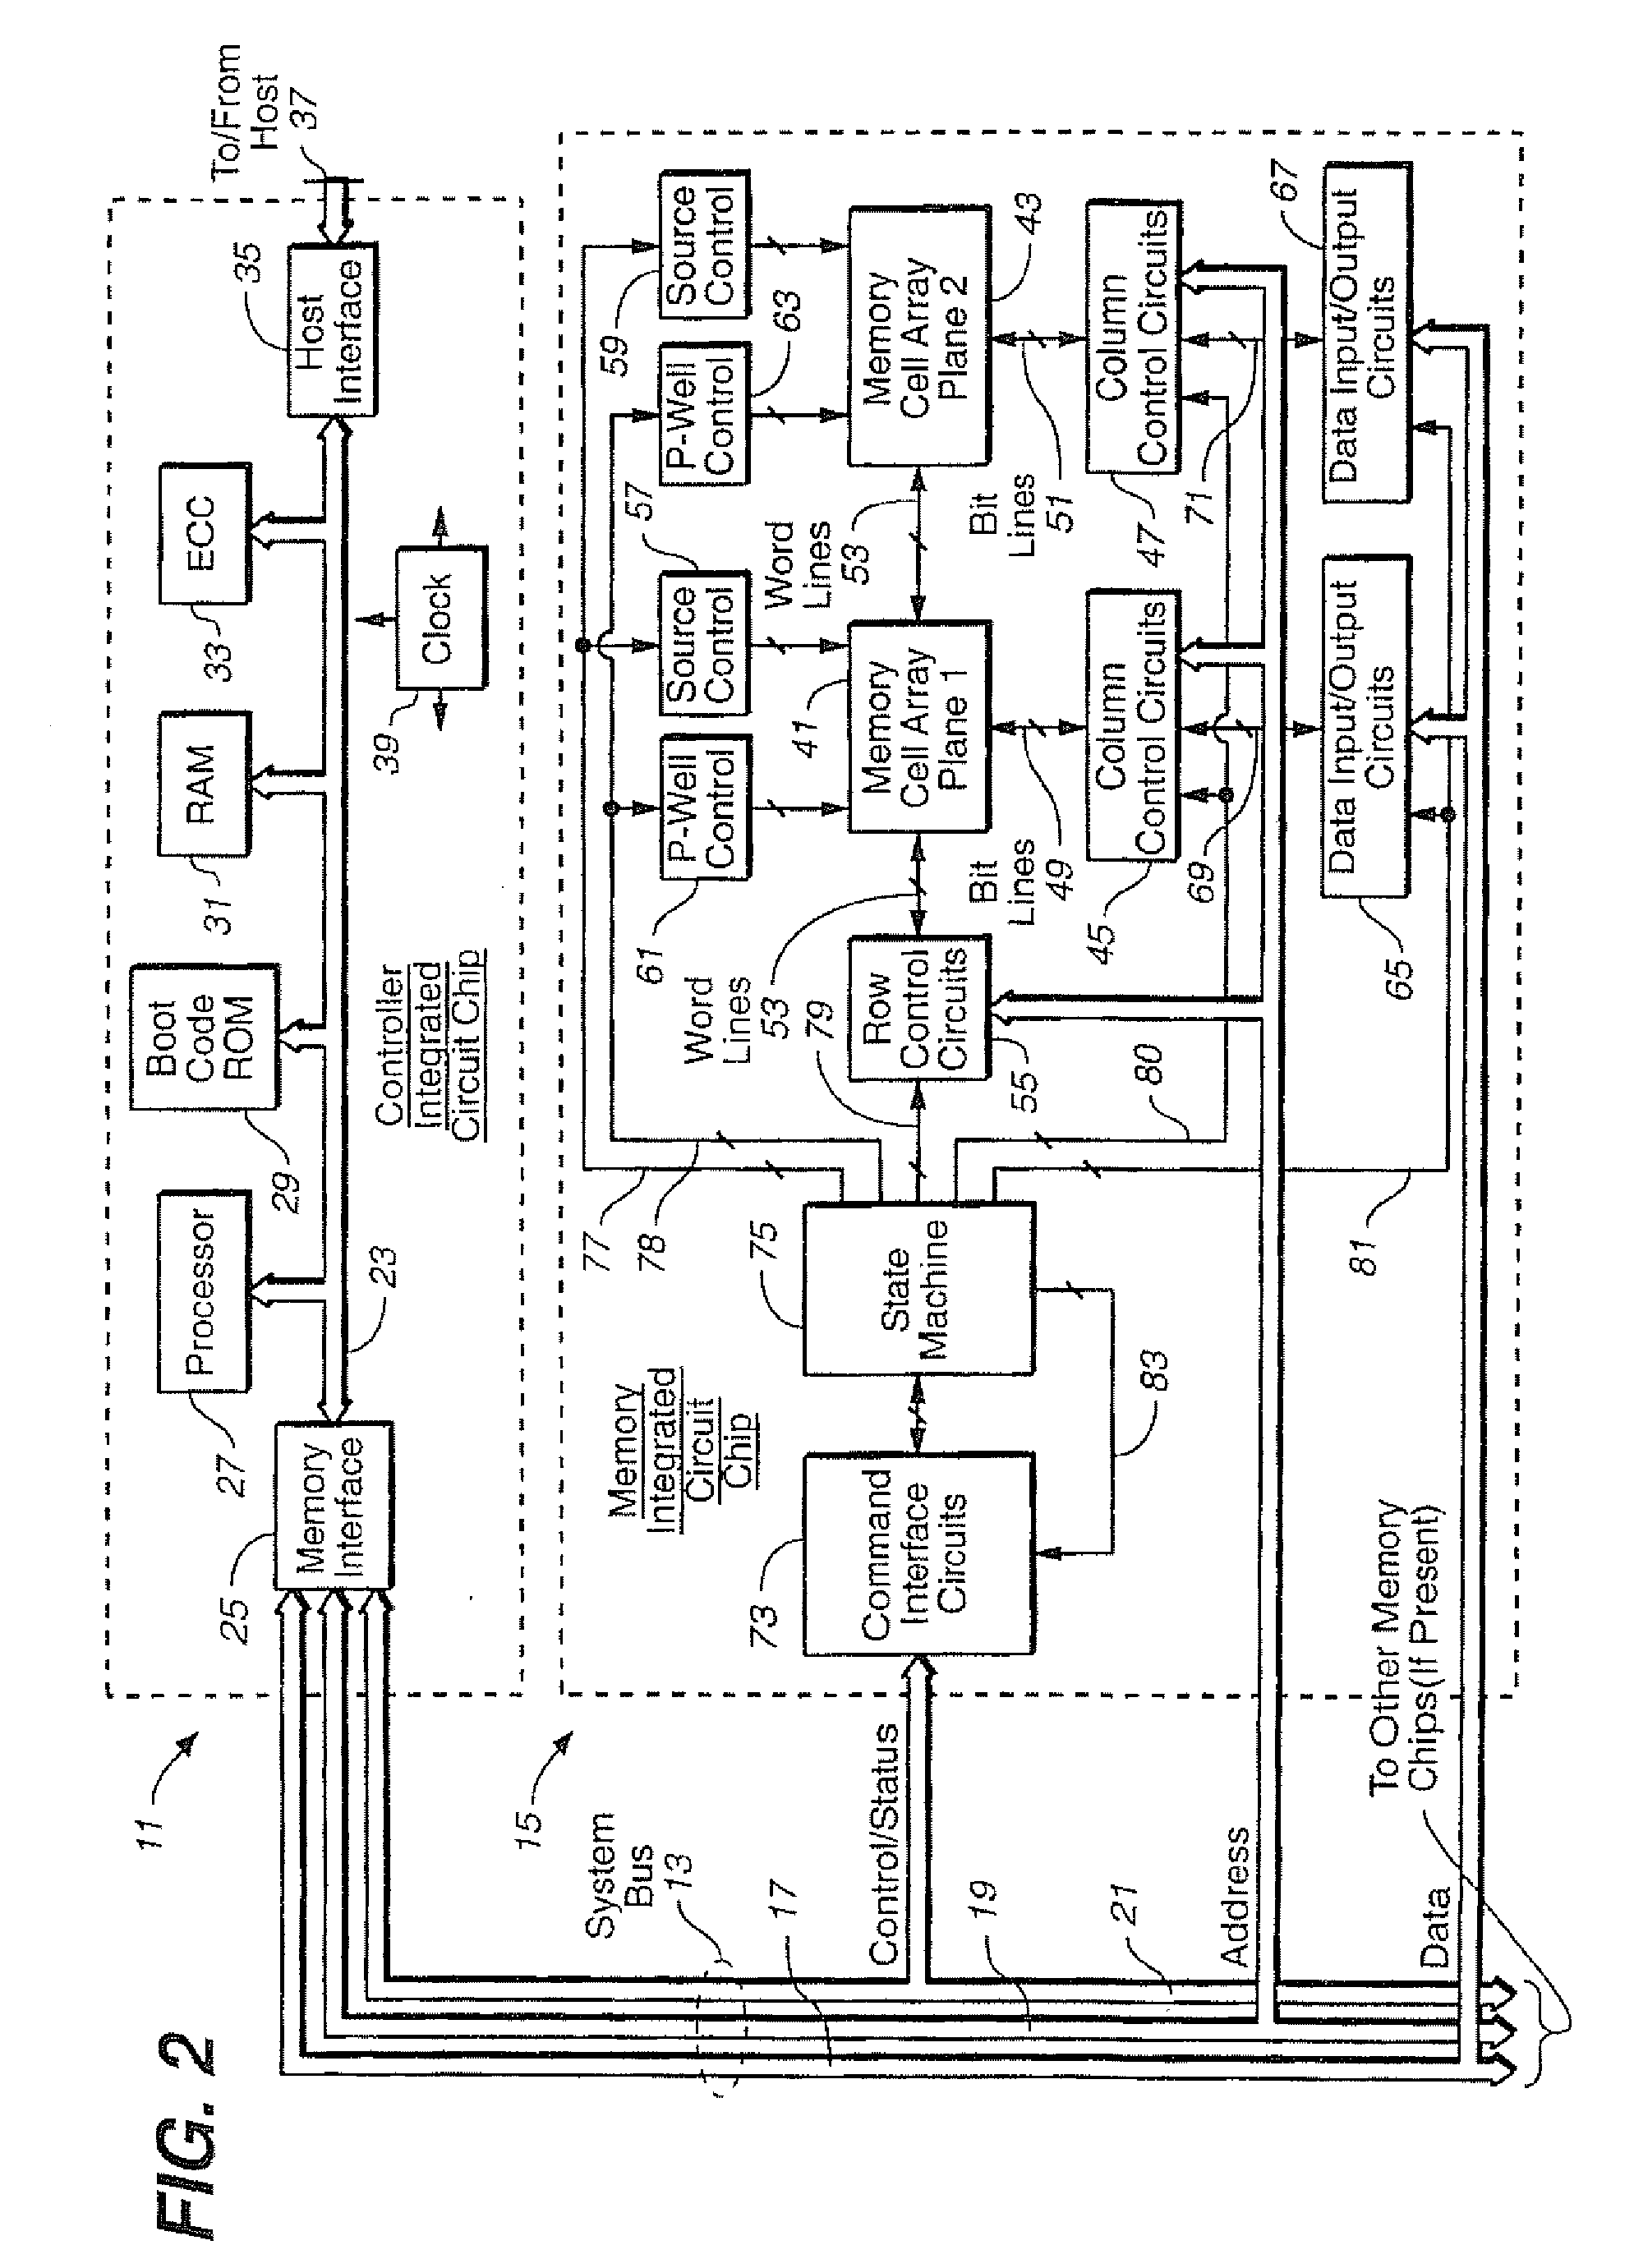 Non-Volatile Memories And Method With Adaptive File Handling In A Directly Mapped File Storage System